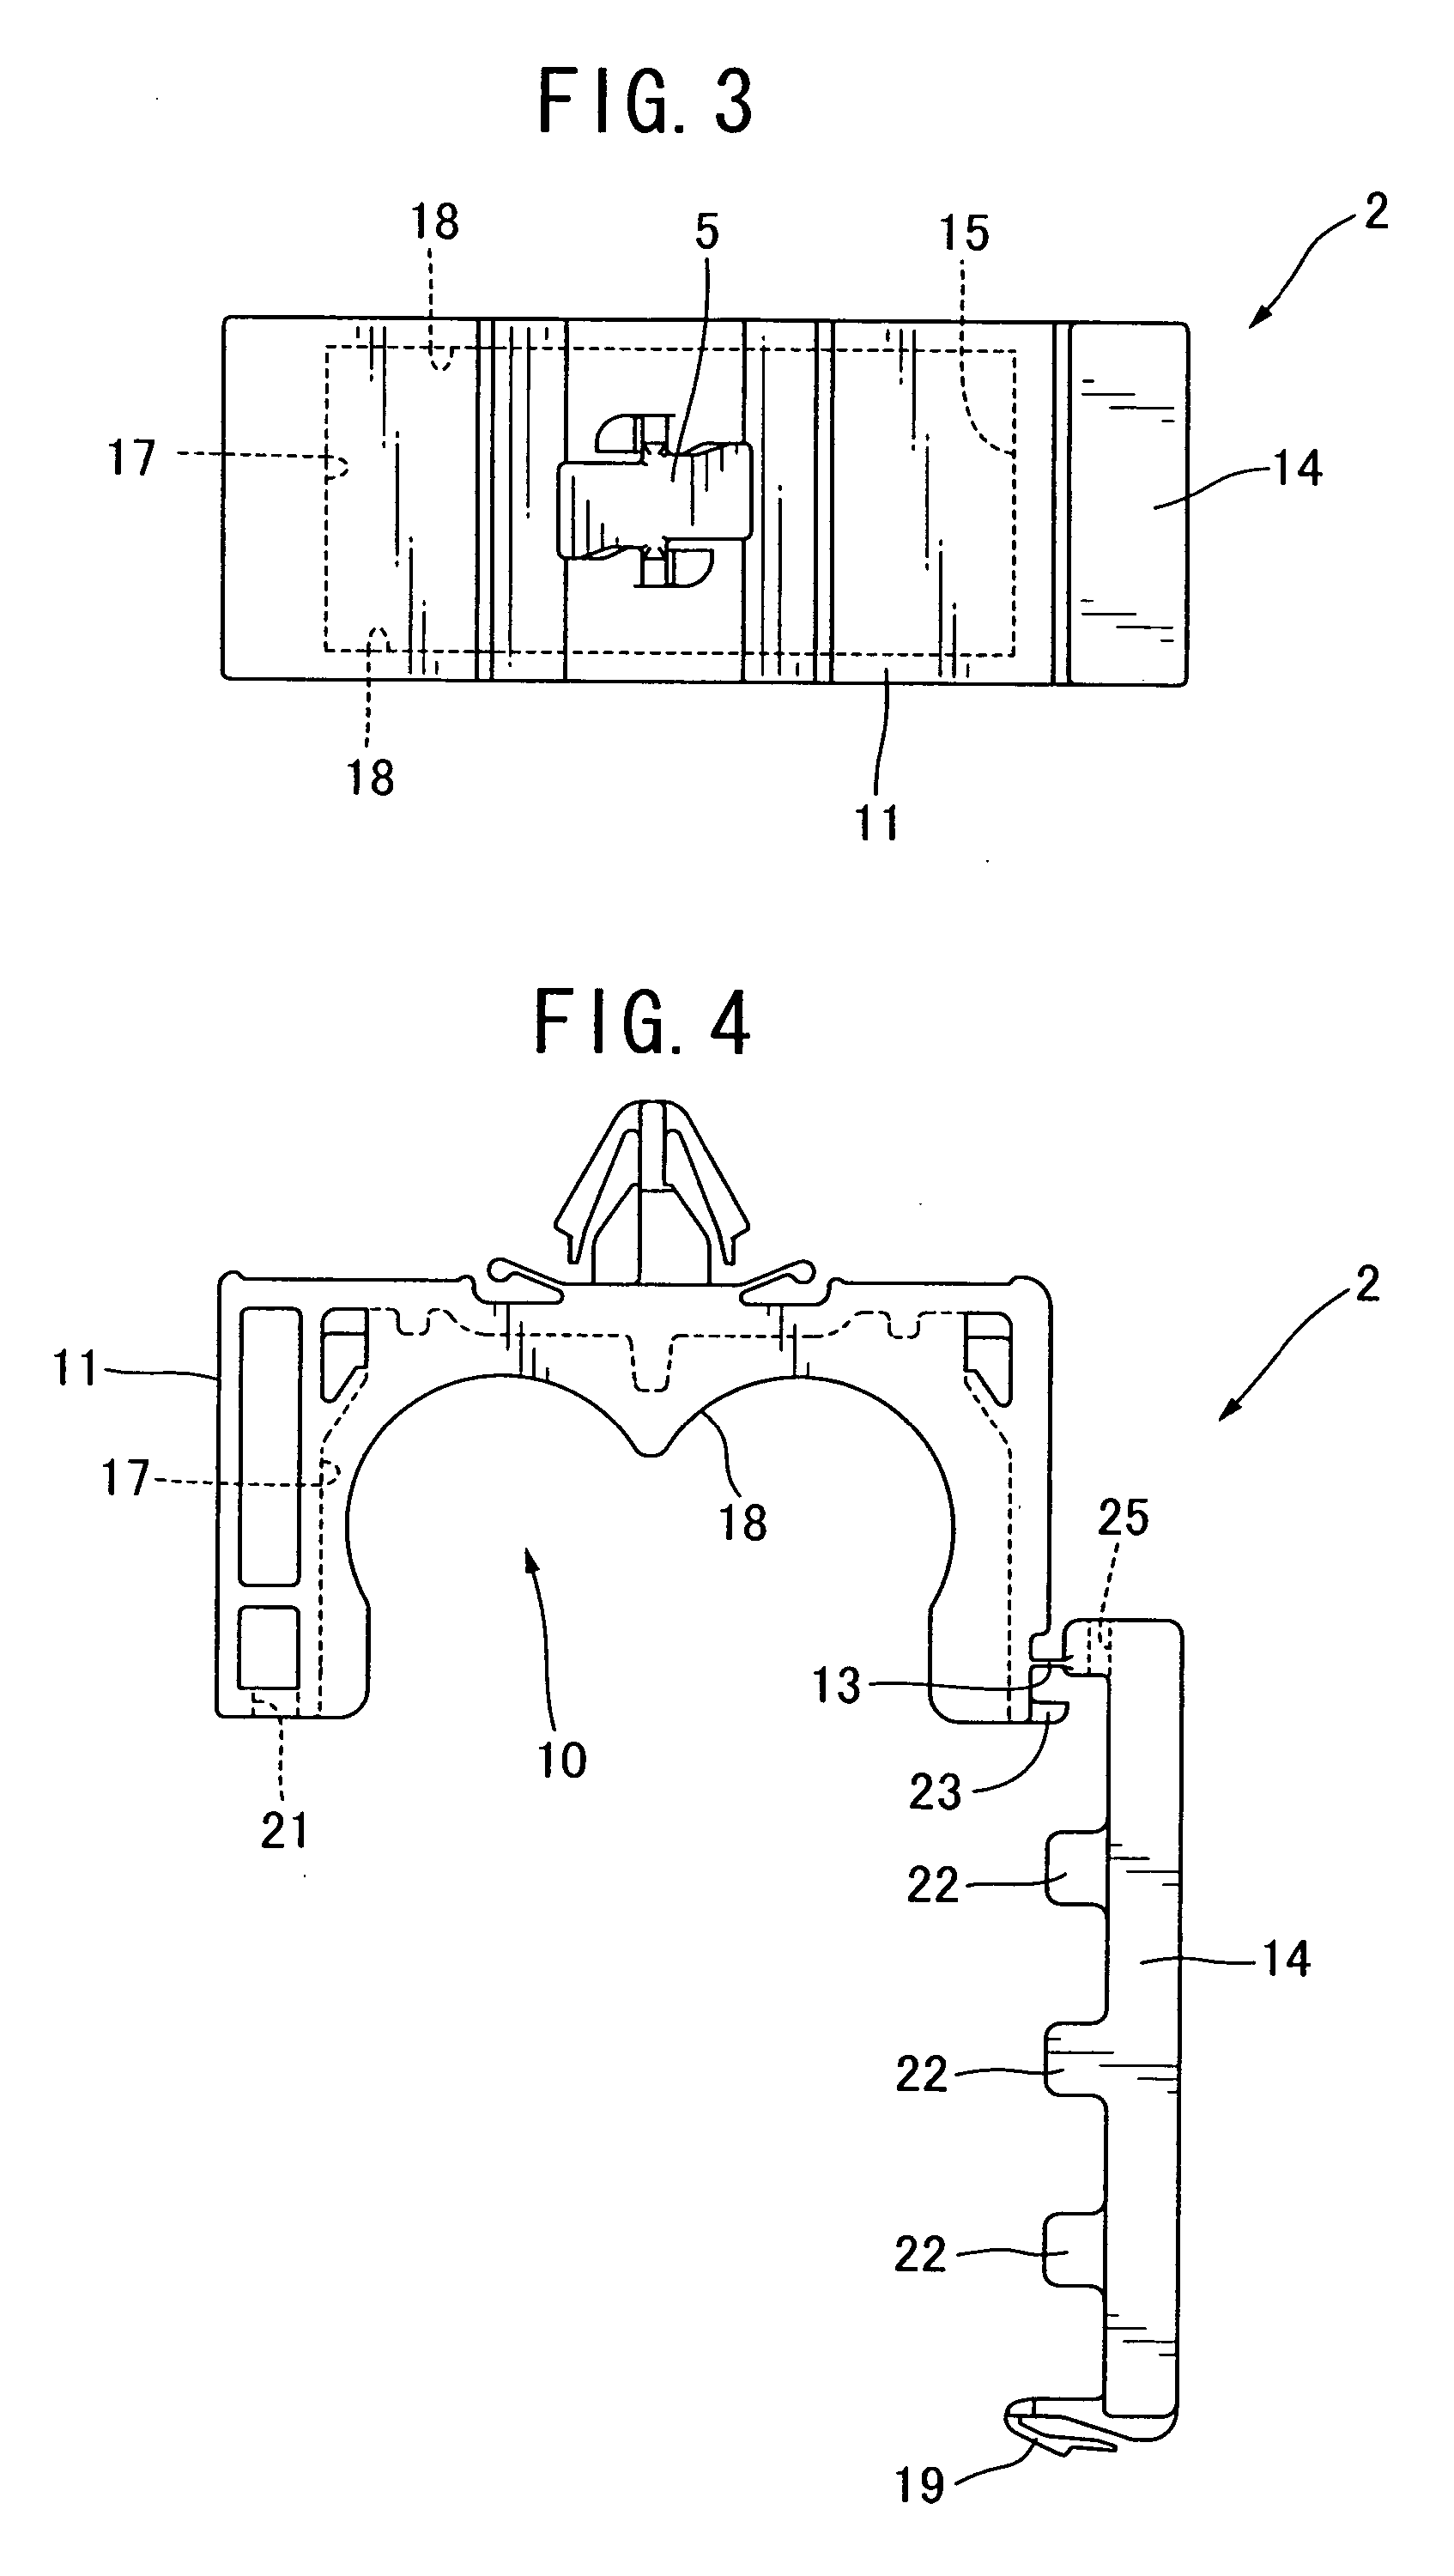 Heat-resistant clamp device for pipes or similar objects